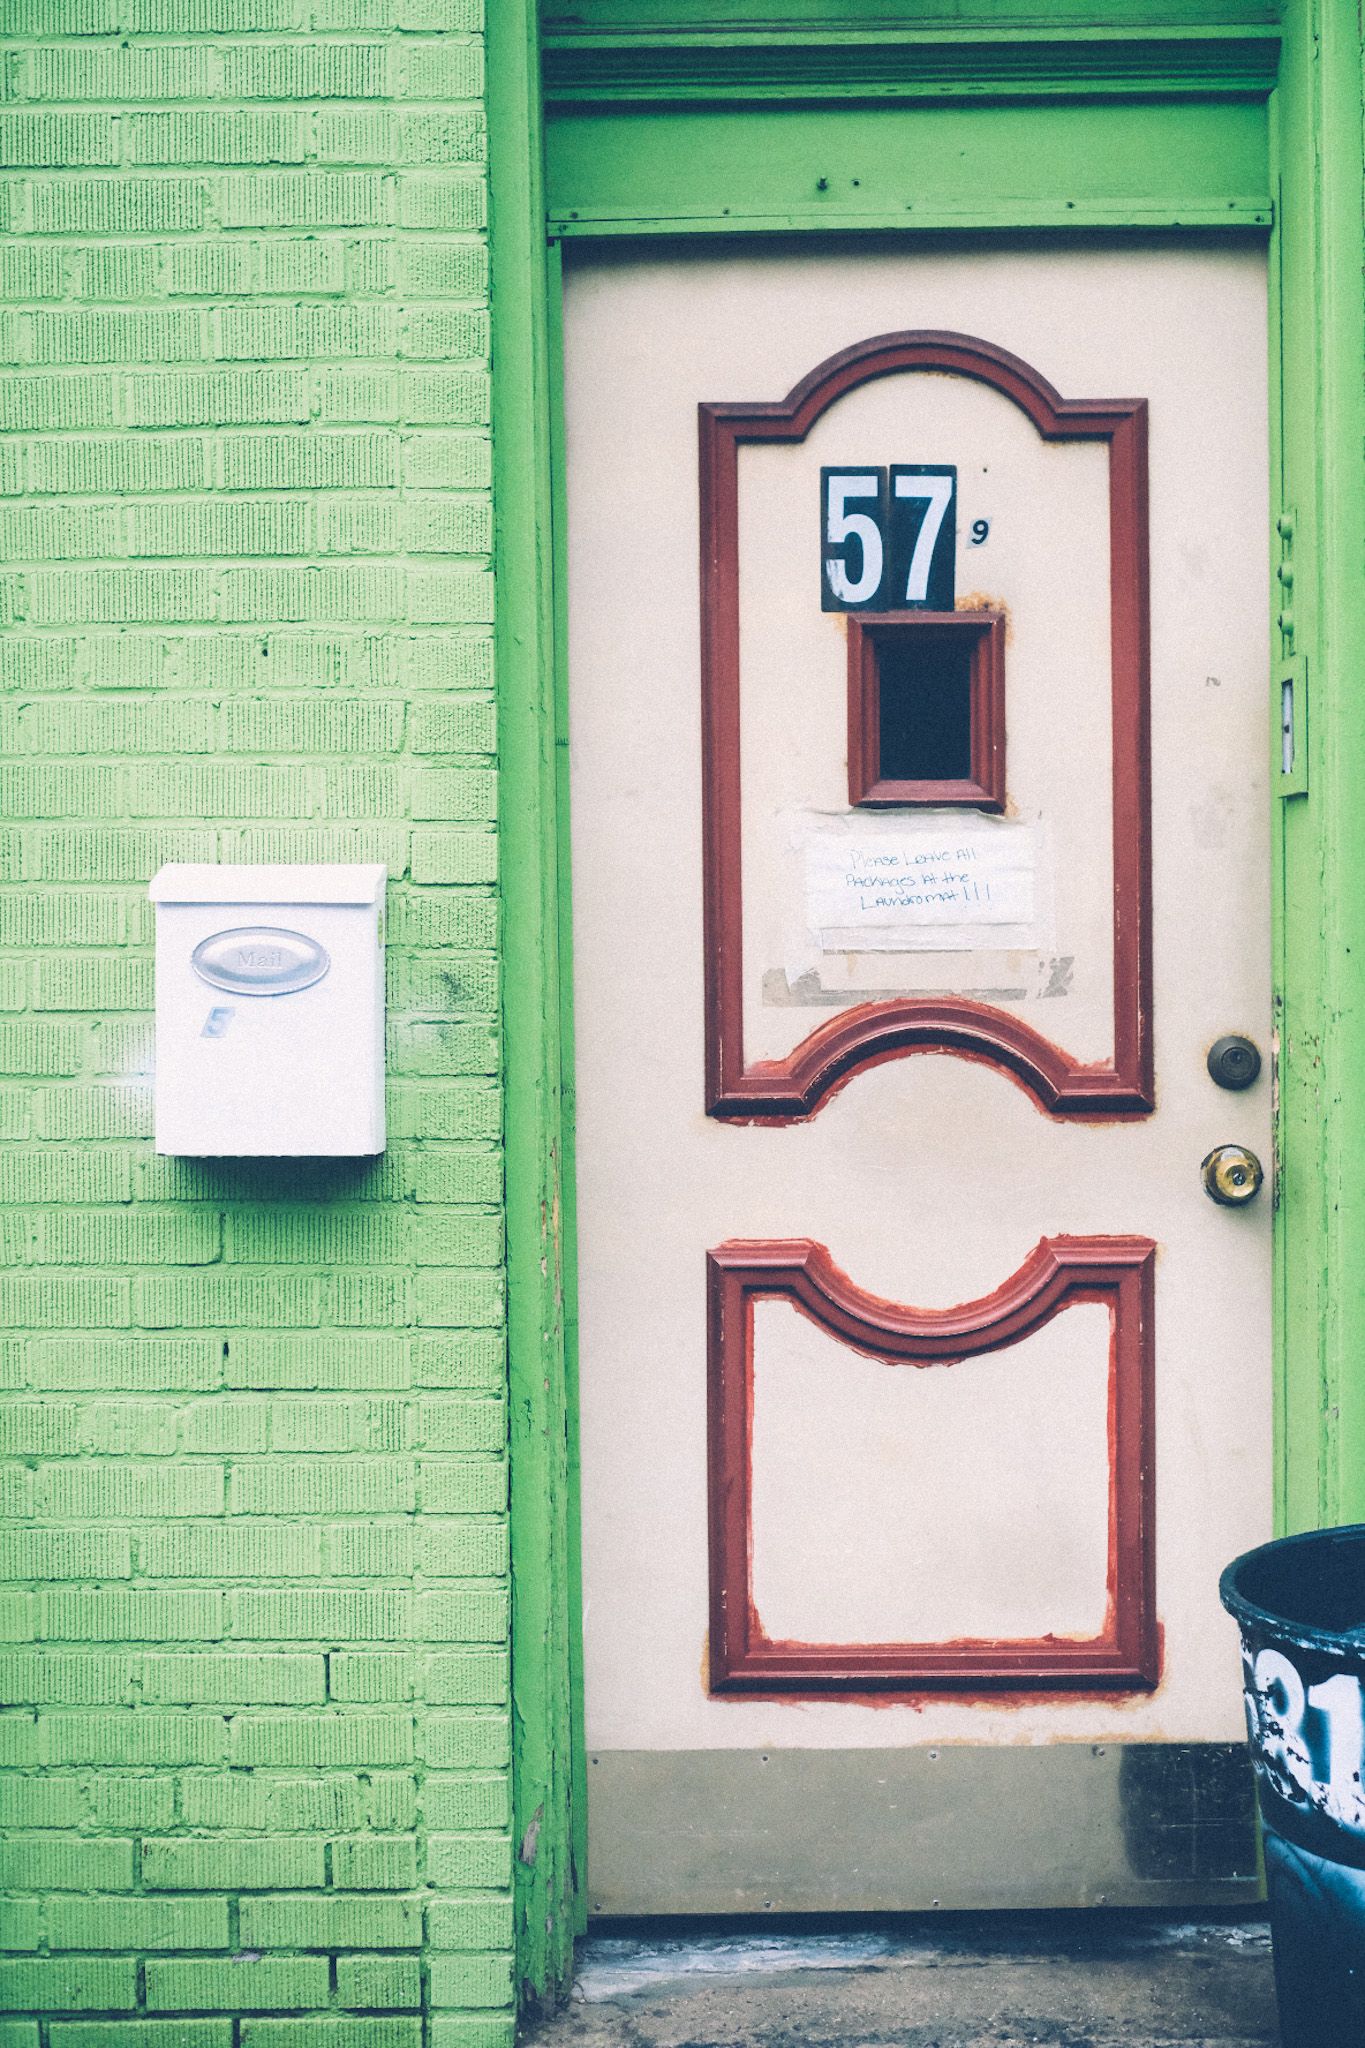 A lime green brick wall frames a cream white door with red detailing, the number 57 stuck on the front of the door along with a handwritten note saying “Please leave all packages at the laundromat!!!”. A white mailbox hangs on the wall to the left, and the corner of a black trash can peeks out on the right.